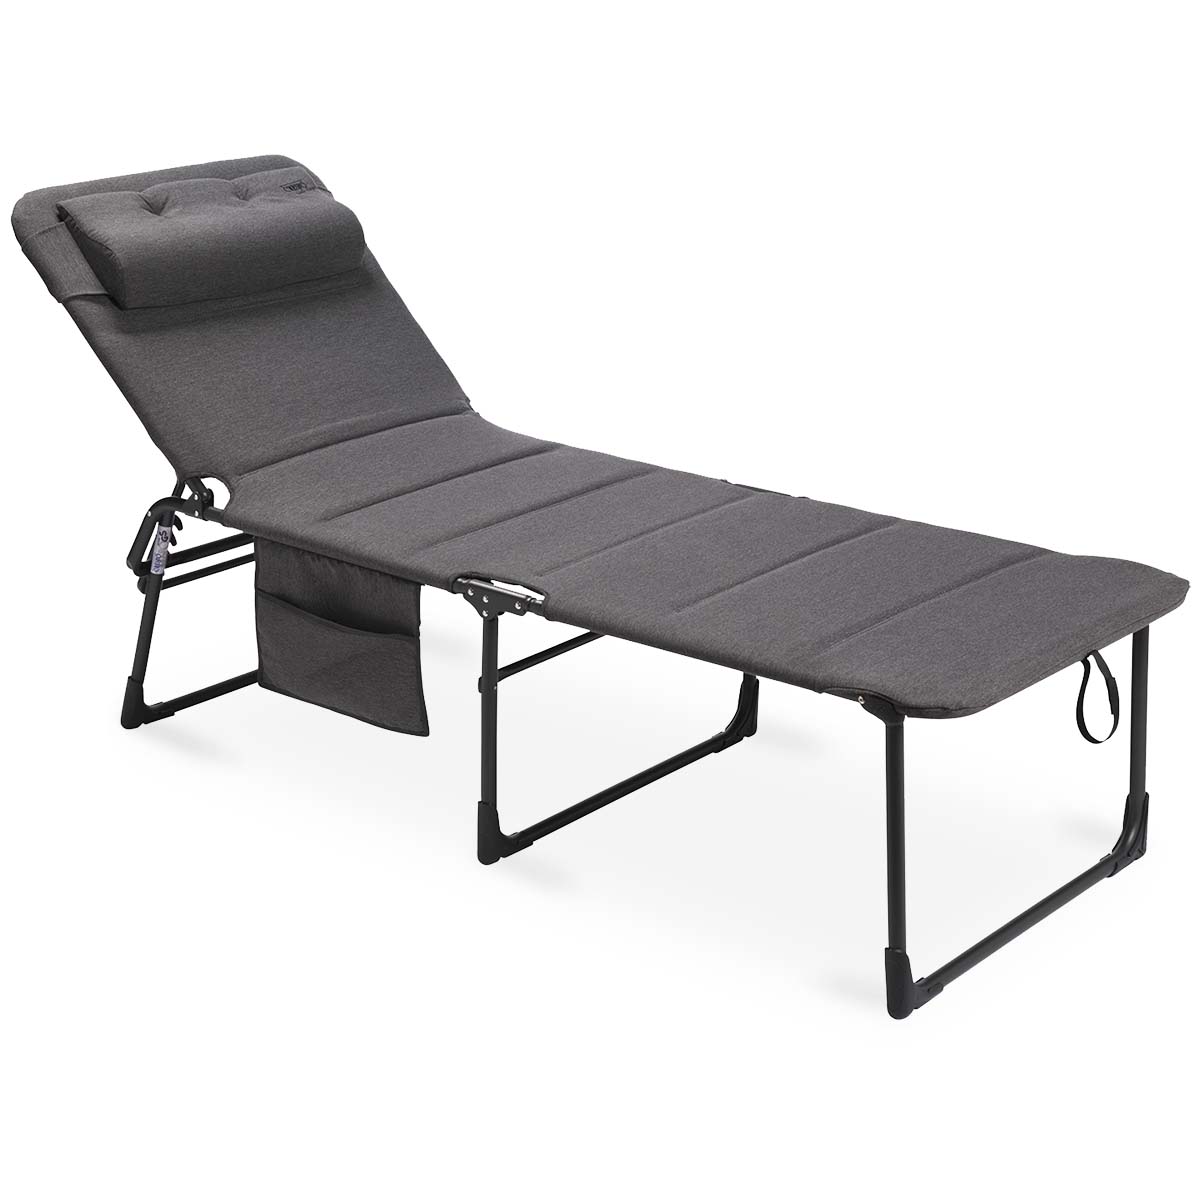 1148279 A very luxurious and one of the most comfortable sun loungers. This foldable bed, adjustable in 5 positions, is equipped with an extra thick and sturdy 3D padded foam filling. The padded fabric wraps entirely around the frame, where the luxurious fabric is attached to the back, creating a very pleasant seating experience. Additionally, the elastics run entirely over the back for increased comfort, and the finishing adds a stylish touch. This padded fabric also does not retain moisture. The sun lounger is extra wide and has easy access. On the side, there is a convenient organizer for storing a book, magazines, a mobile phone, etc. After use, this bed can be quickly and easily folded flat.